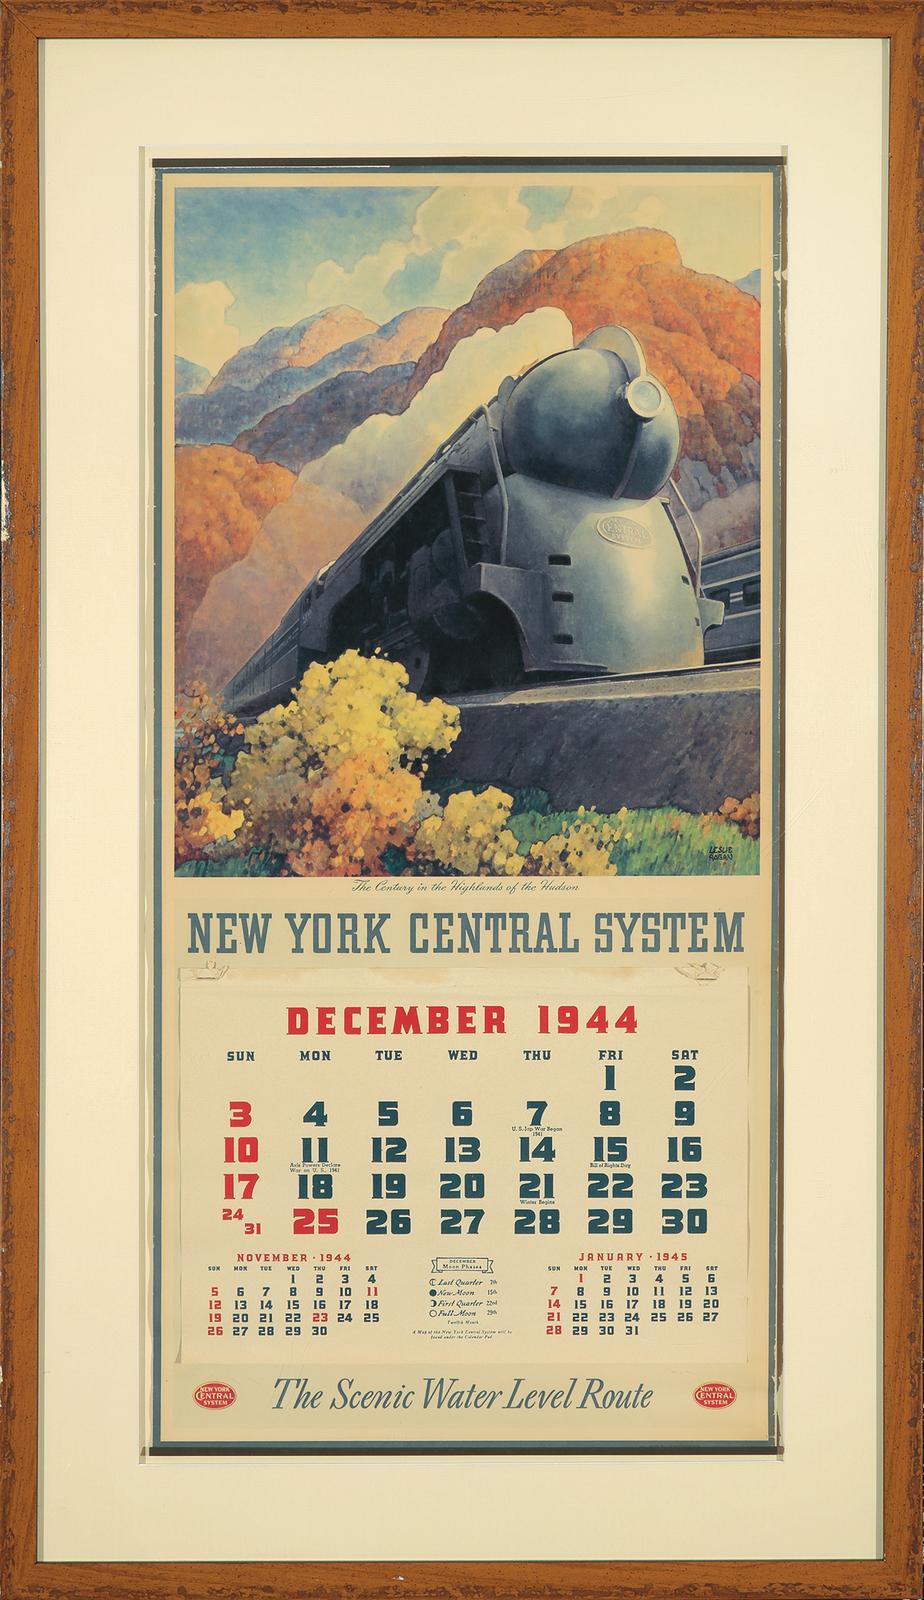 New York Central / The Century in the Highlands of the Hudson. 1944. |  Poster Auctions International,